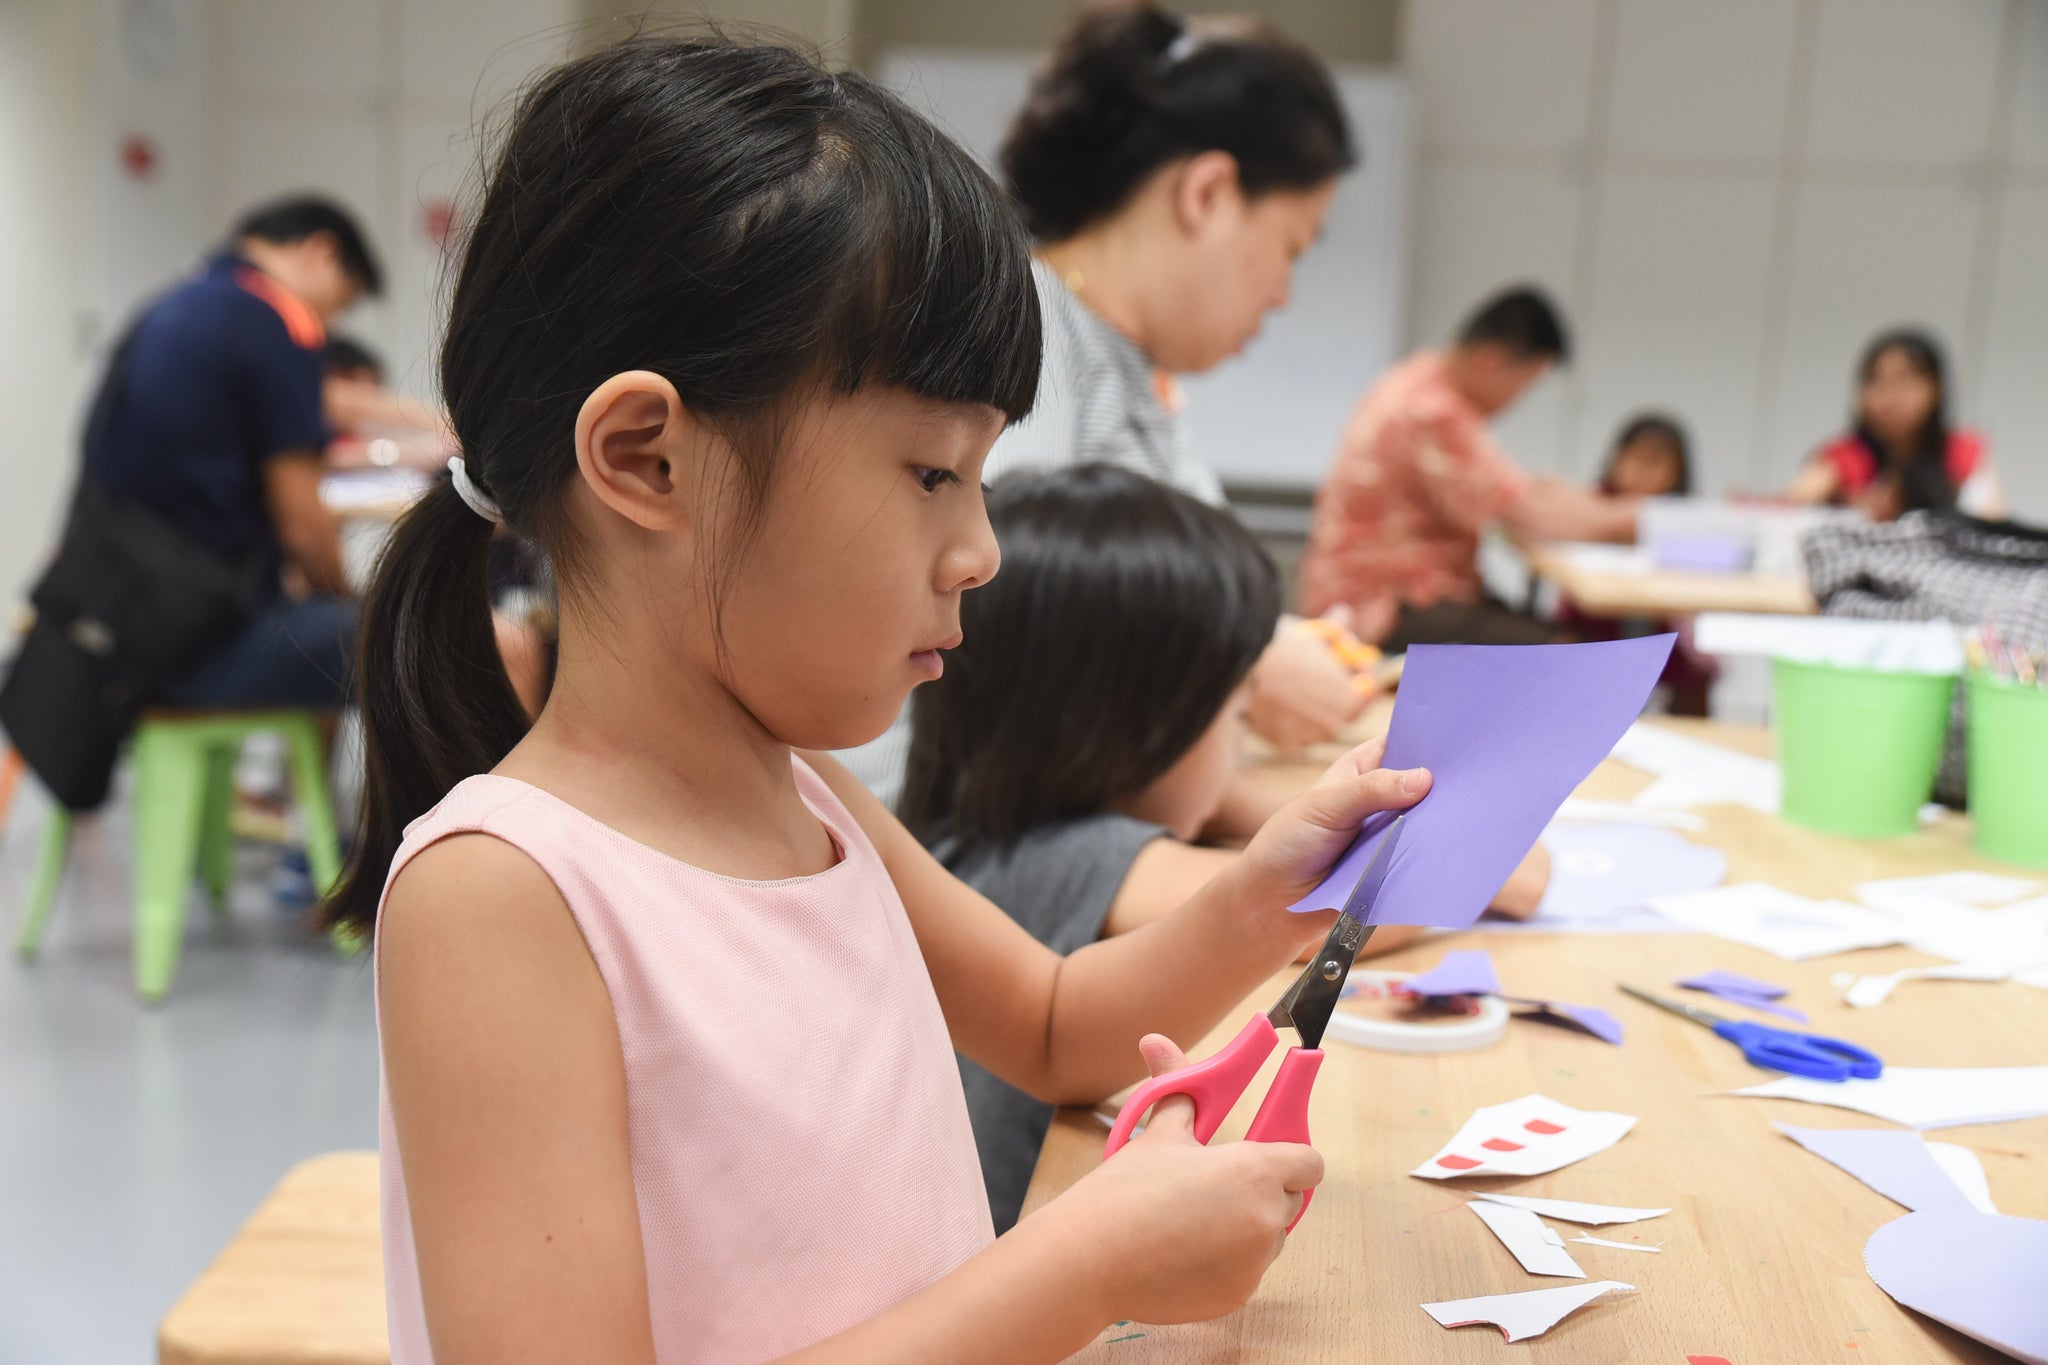 Gallery Kids! A Dedicated Website for Families by the National Gallery Singapore!